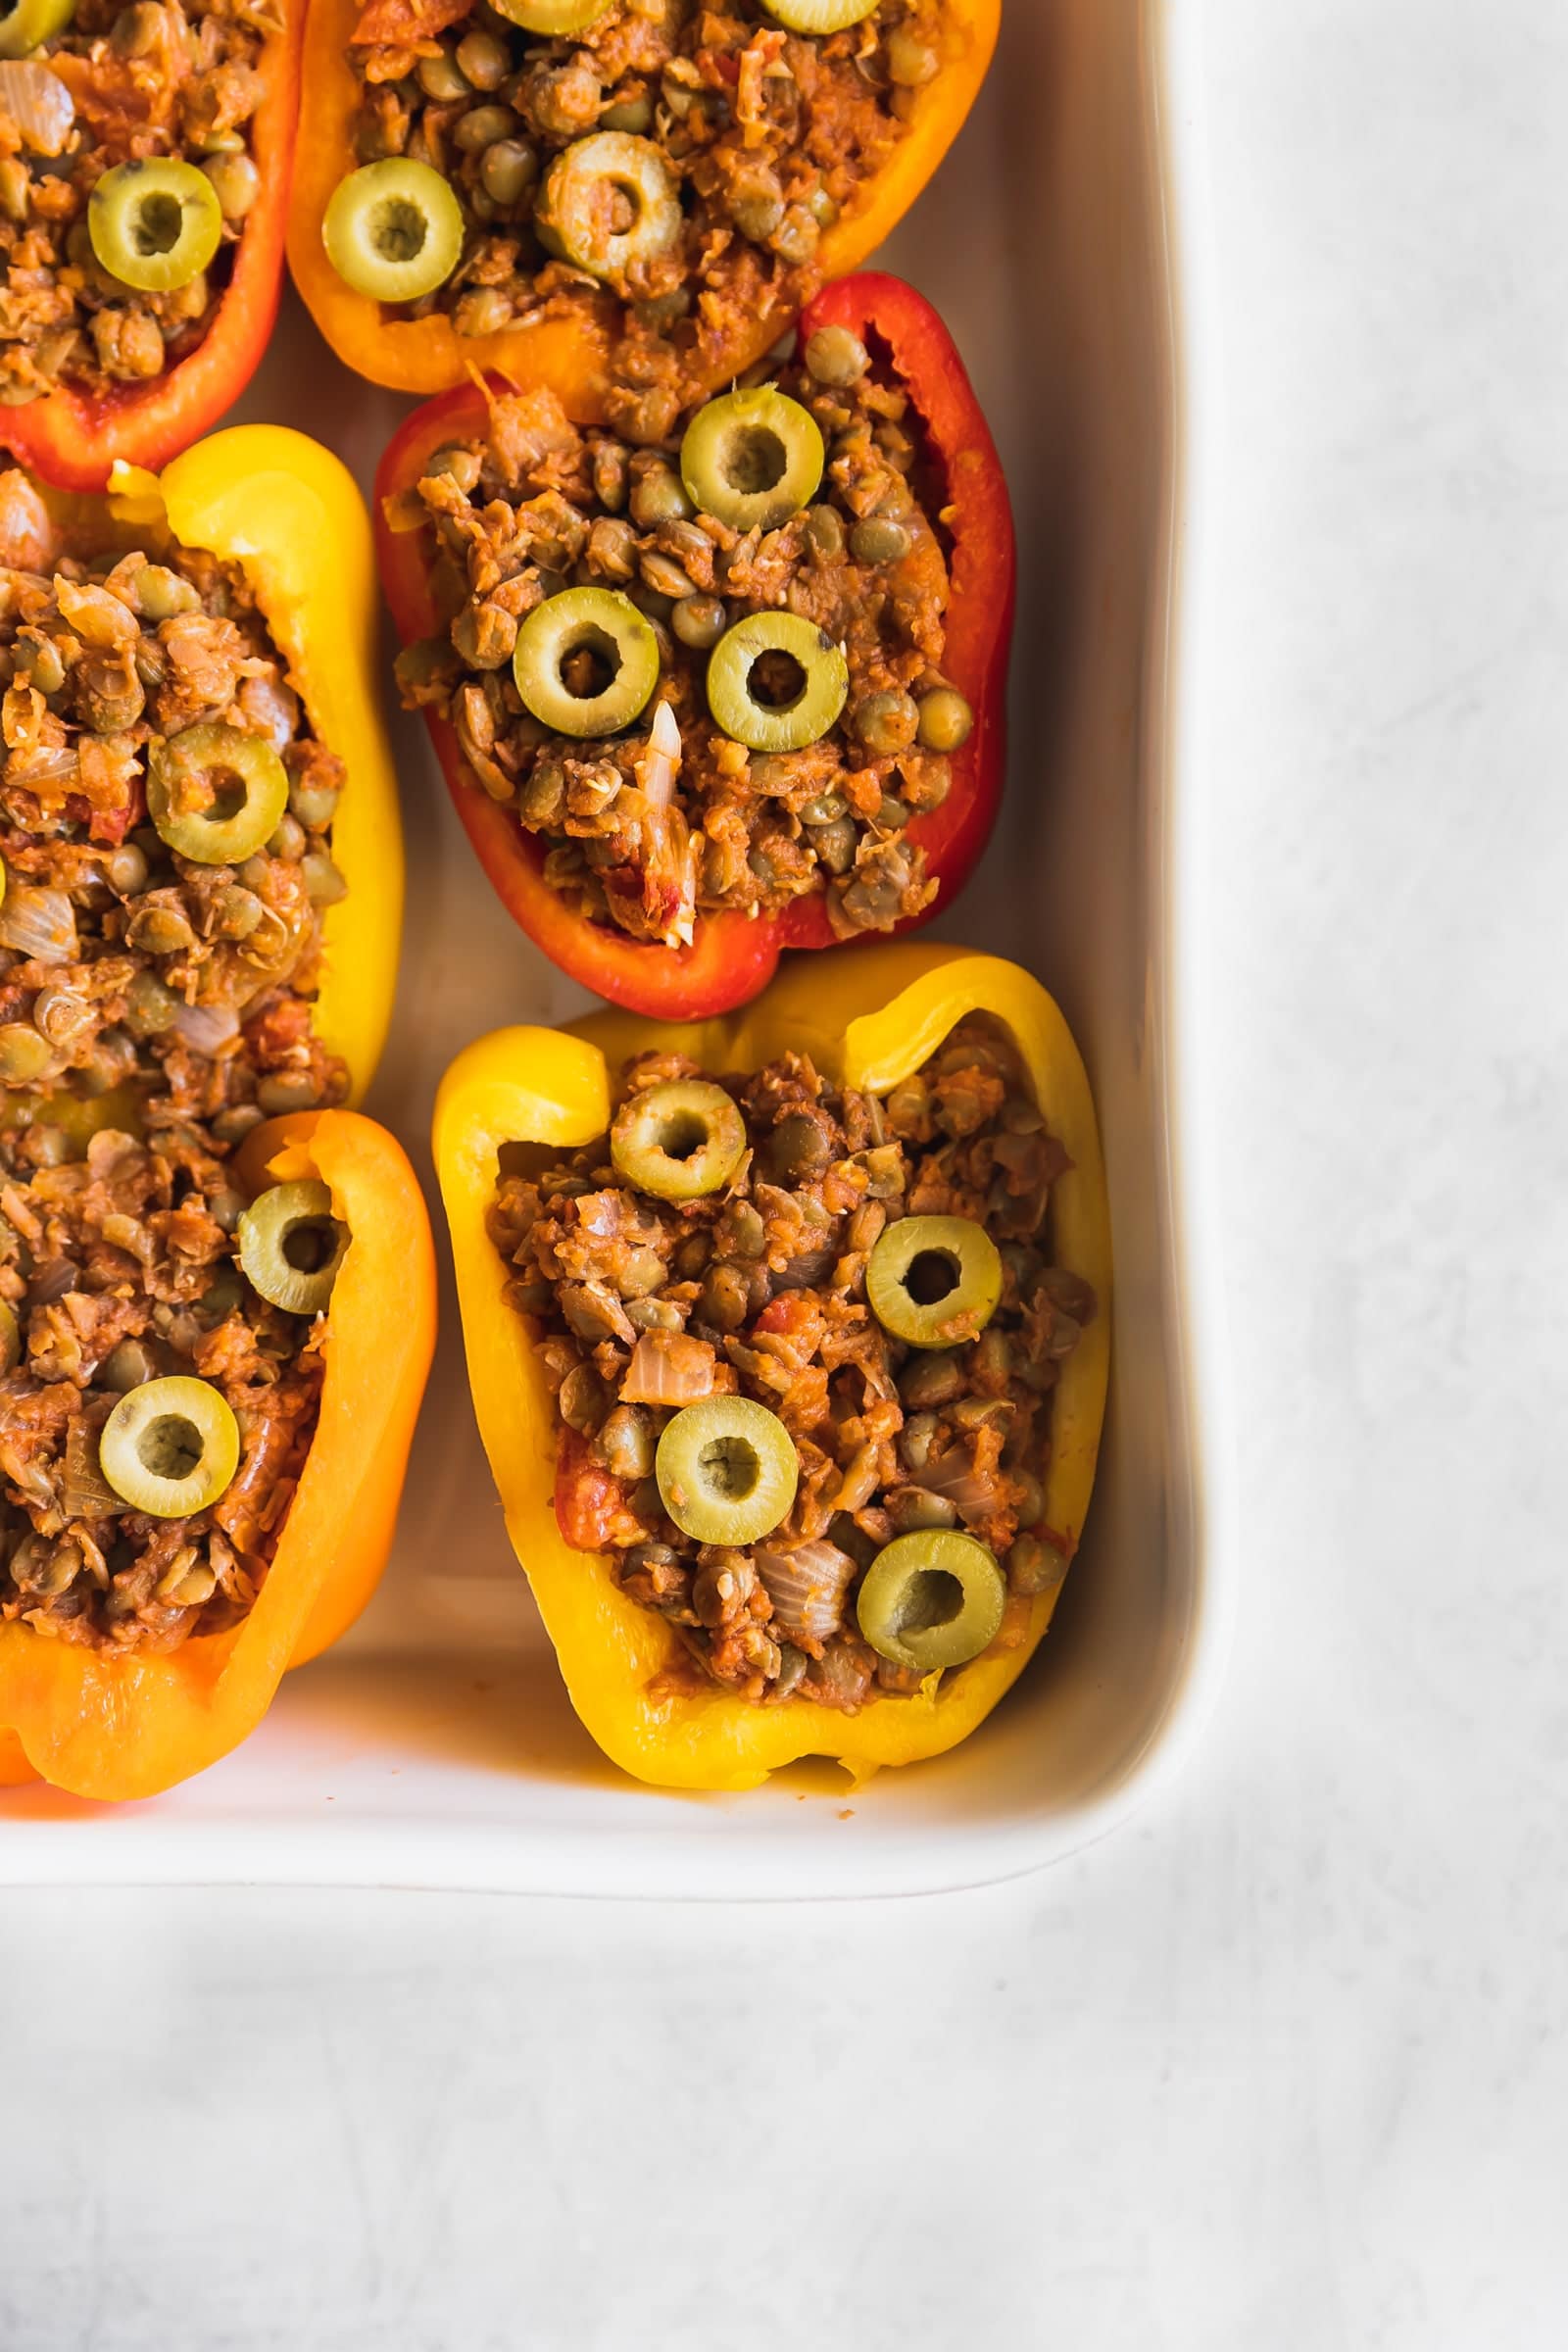 Cuban-Style Vegan Picadillo Stuffed Peppers. This vegan picadillo is a plant-based meal made Cuban-style with lentils, spices, onions, garlic, tomatoes, olives then stuffed in bell peppers. Perfect weeknight dinner!